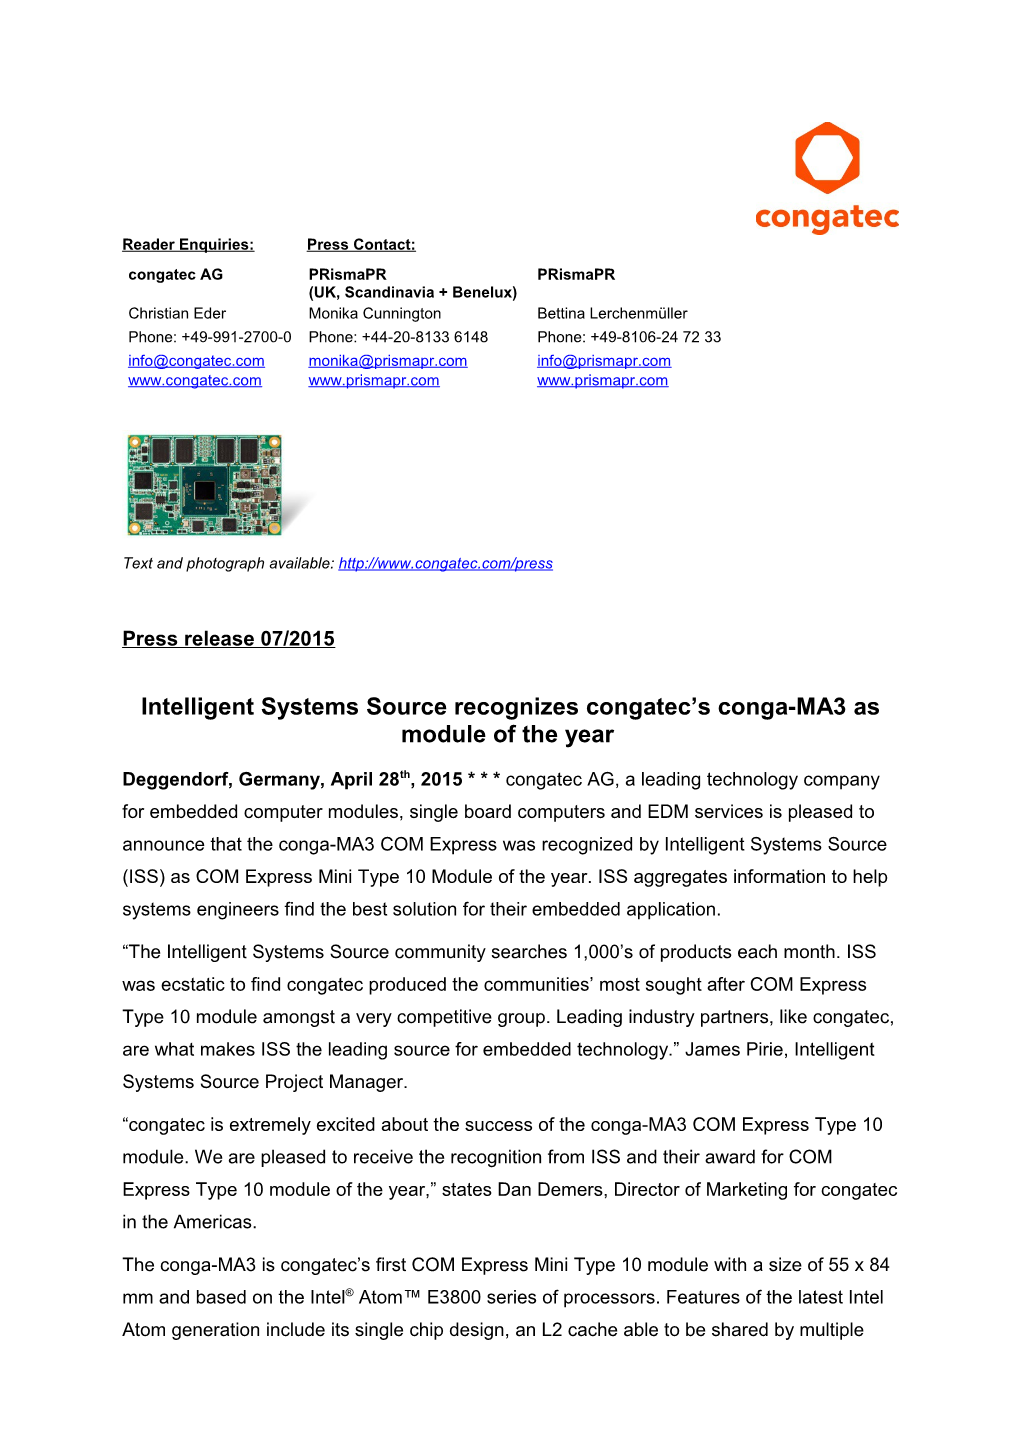 Intelligent Systems Source Recognizes Congatec S Conga-MA3 As Module of the Year